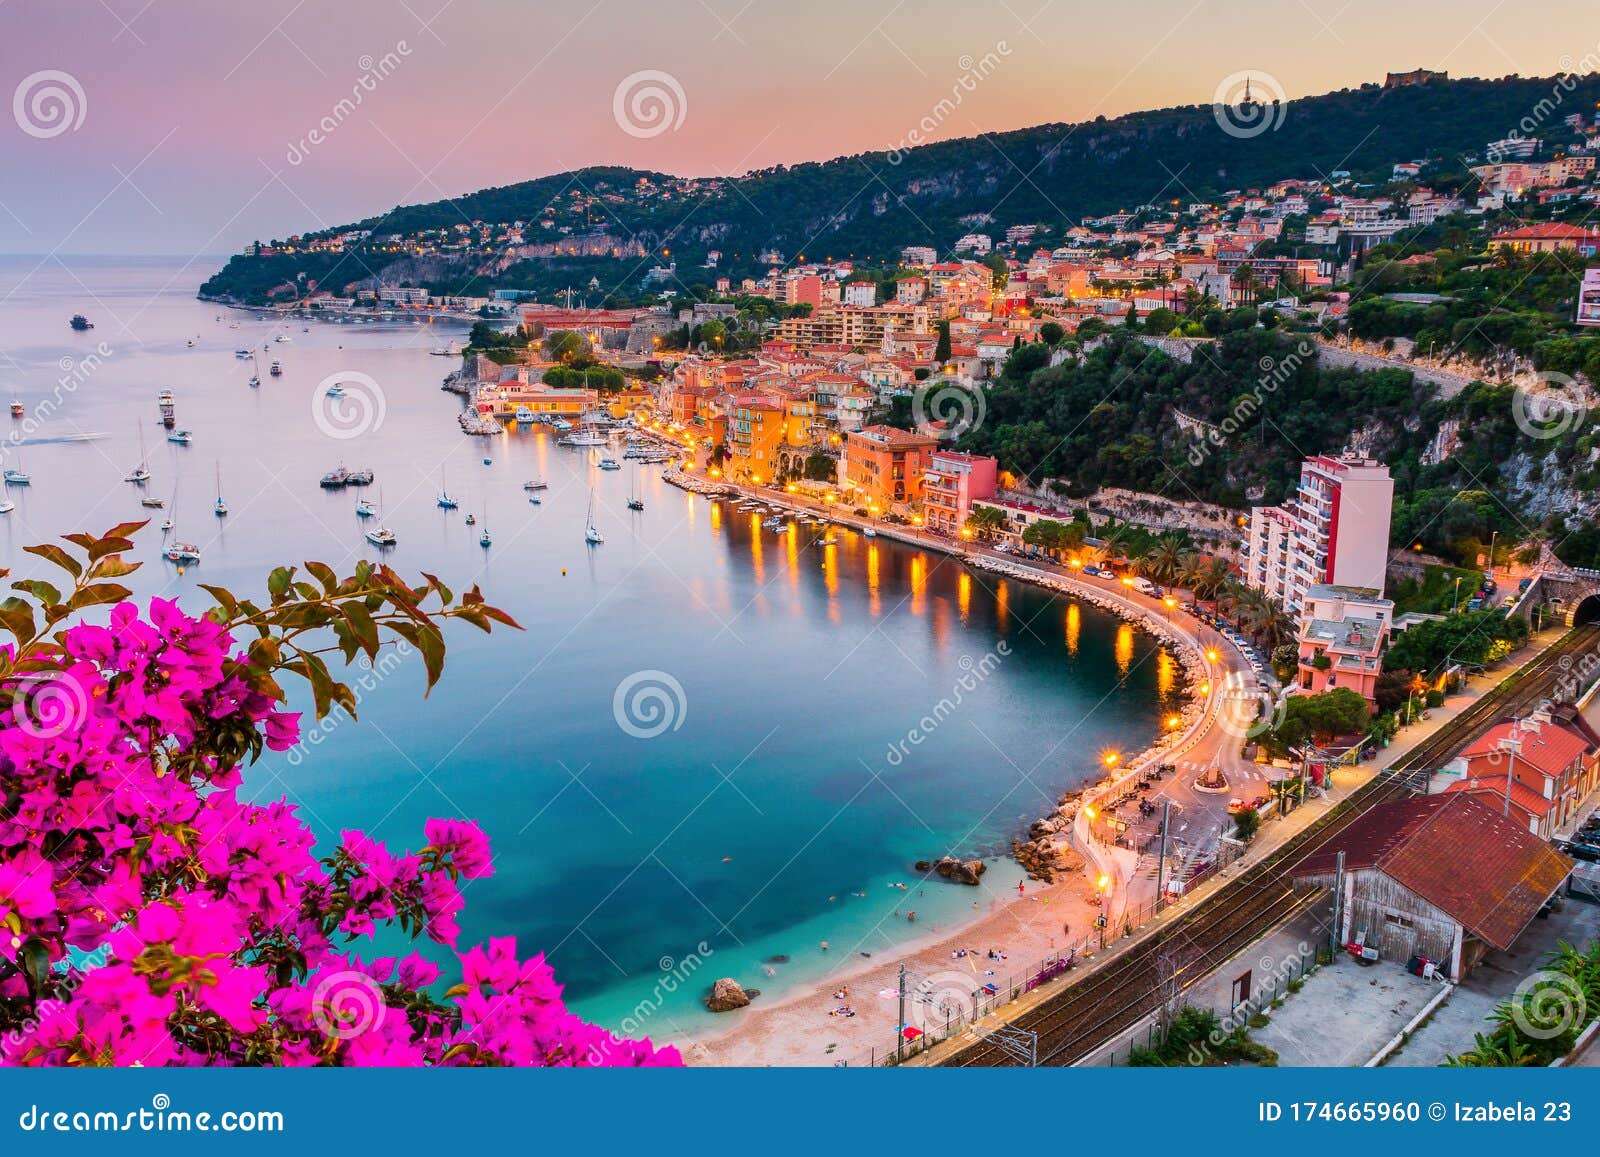 villefranche sur mer, france. seaside town on the french riviera.